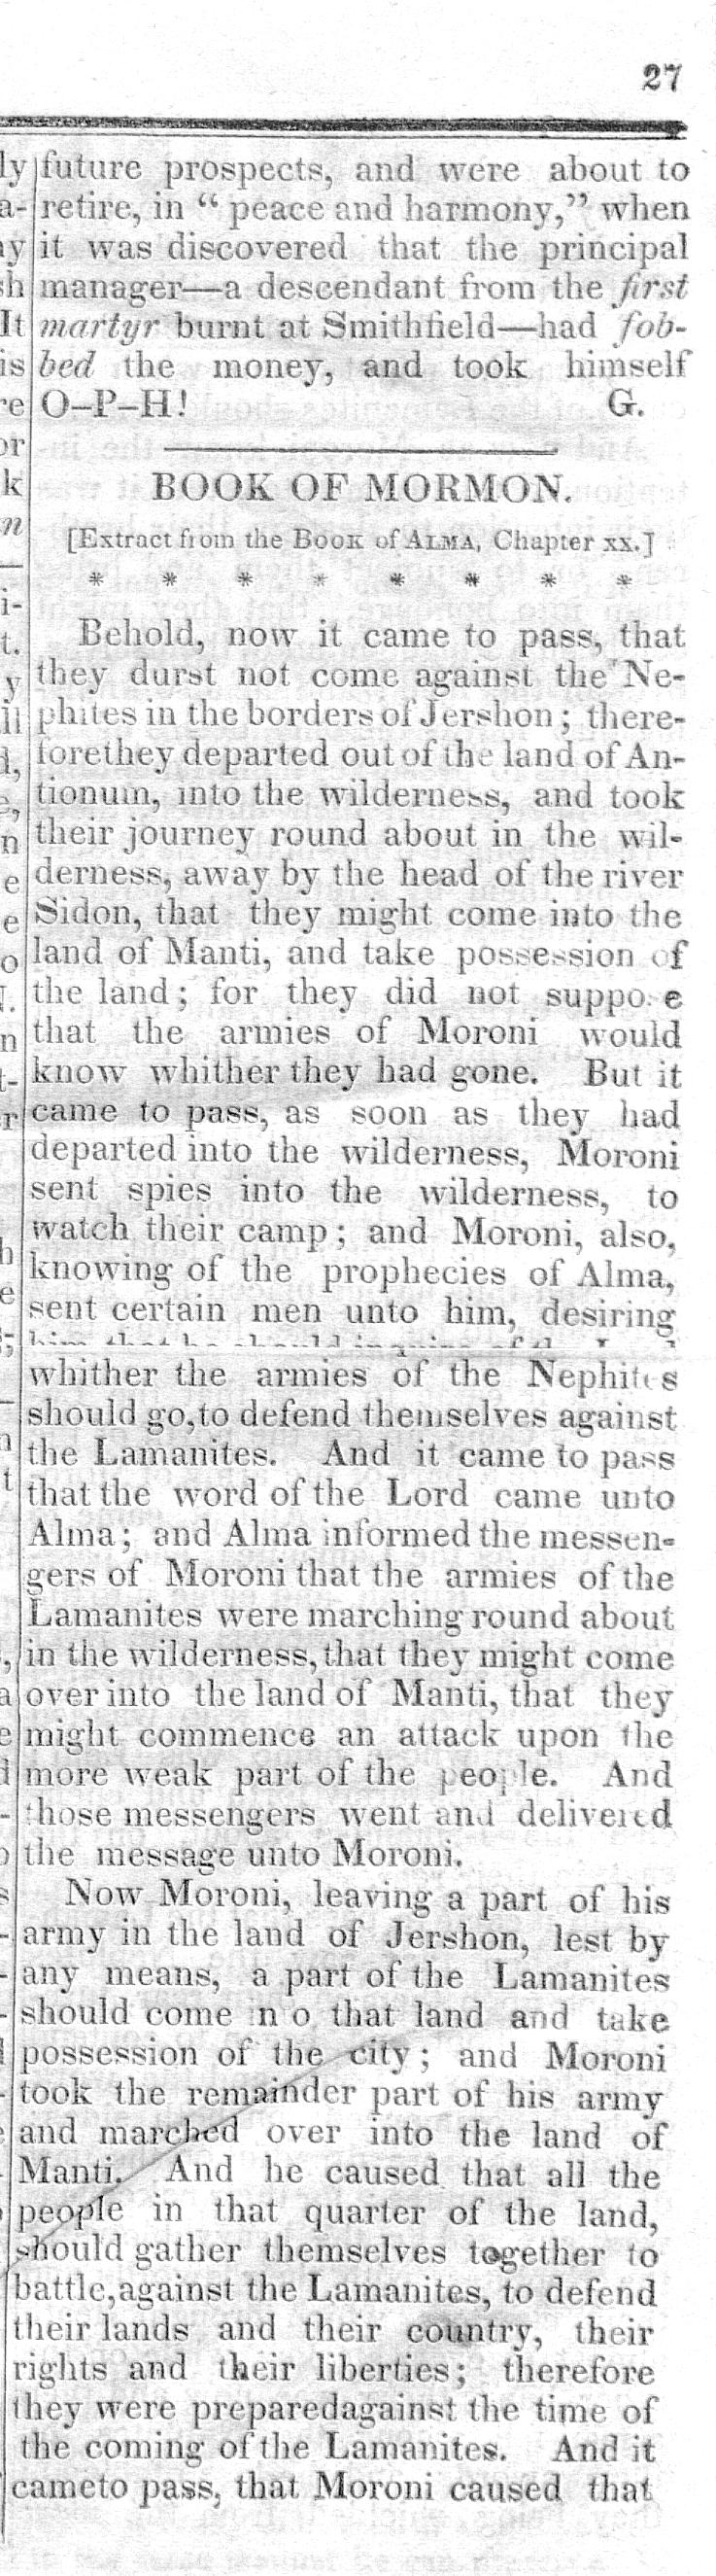 240 Journal of Book of Mormon Studies A close comparison between the Alma excerpt and the 1830 edition, however, shows a different set of circumstances.